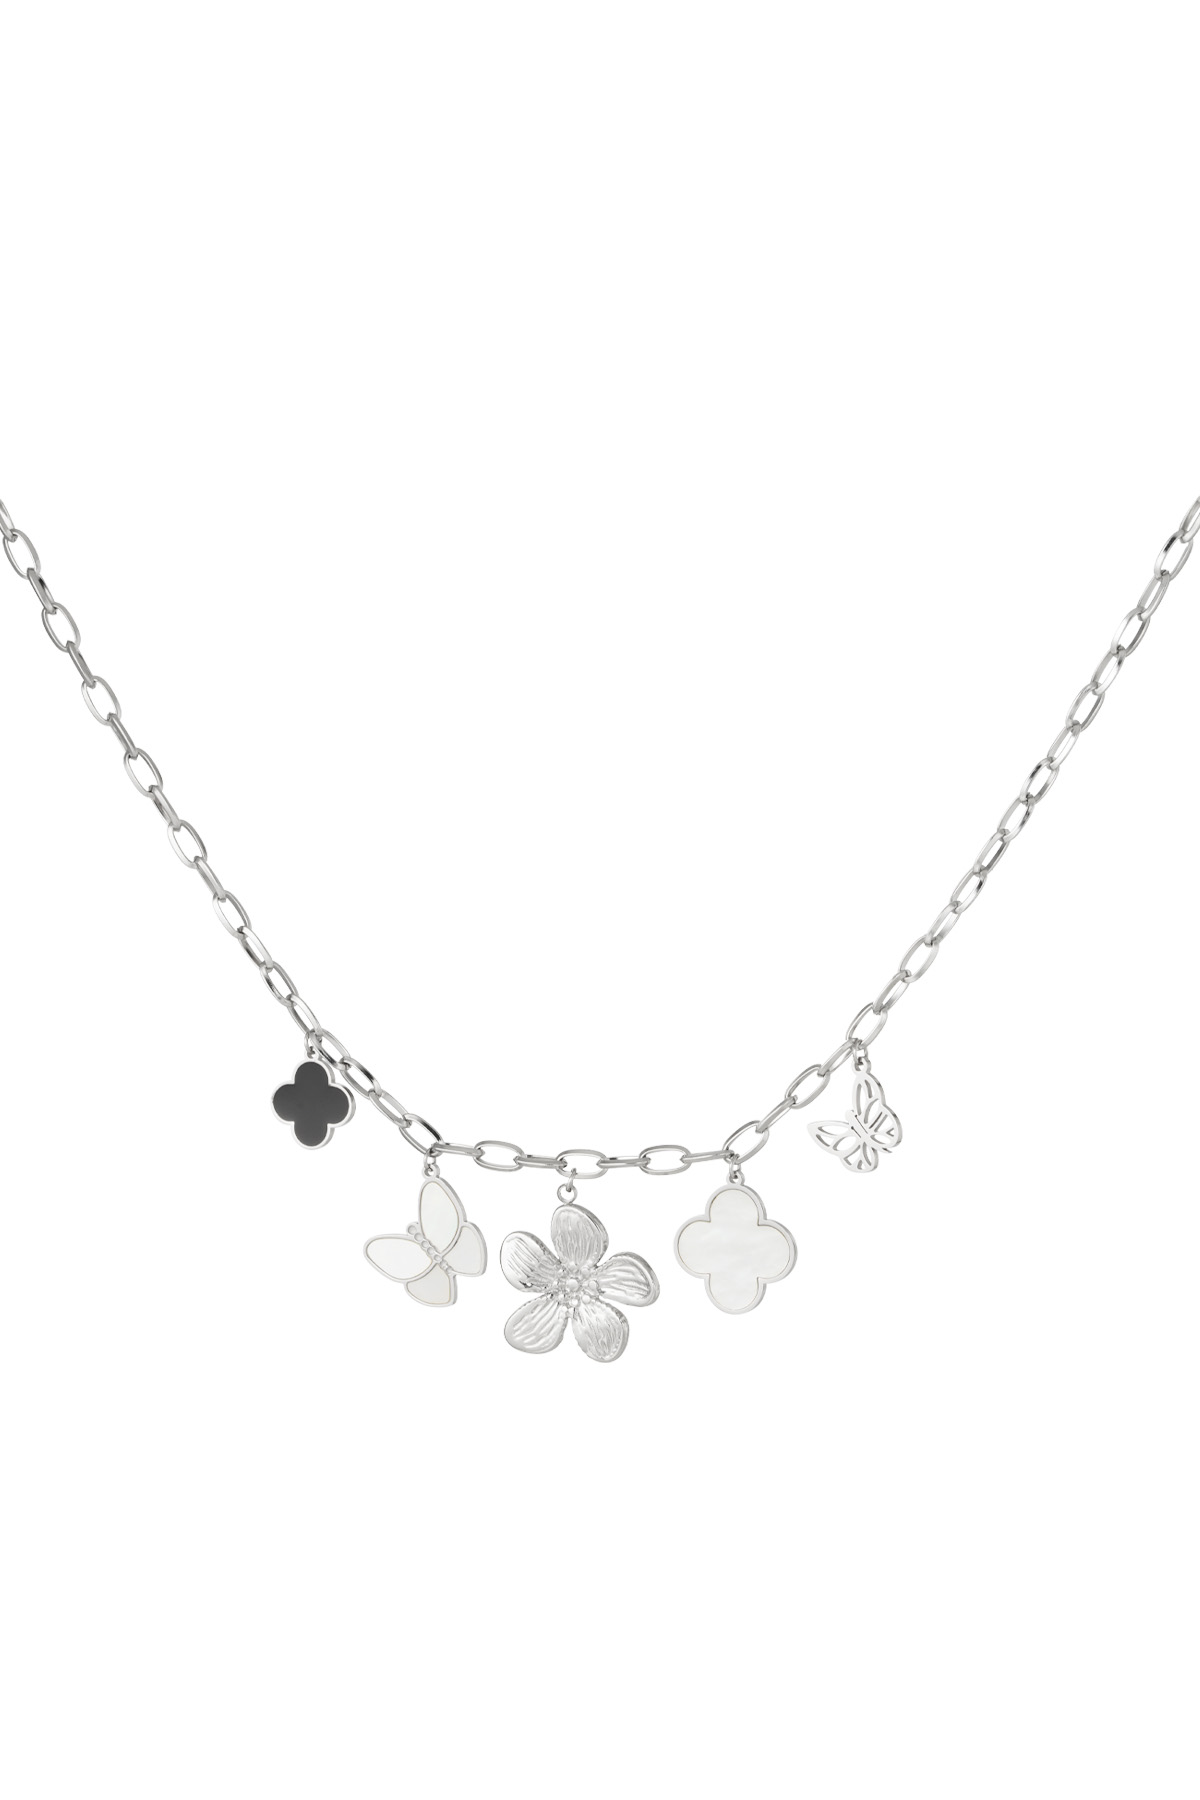 Collier charm ambiance nature - argent